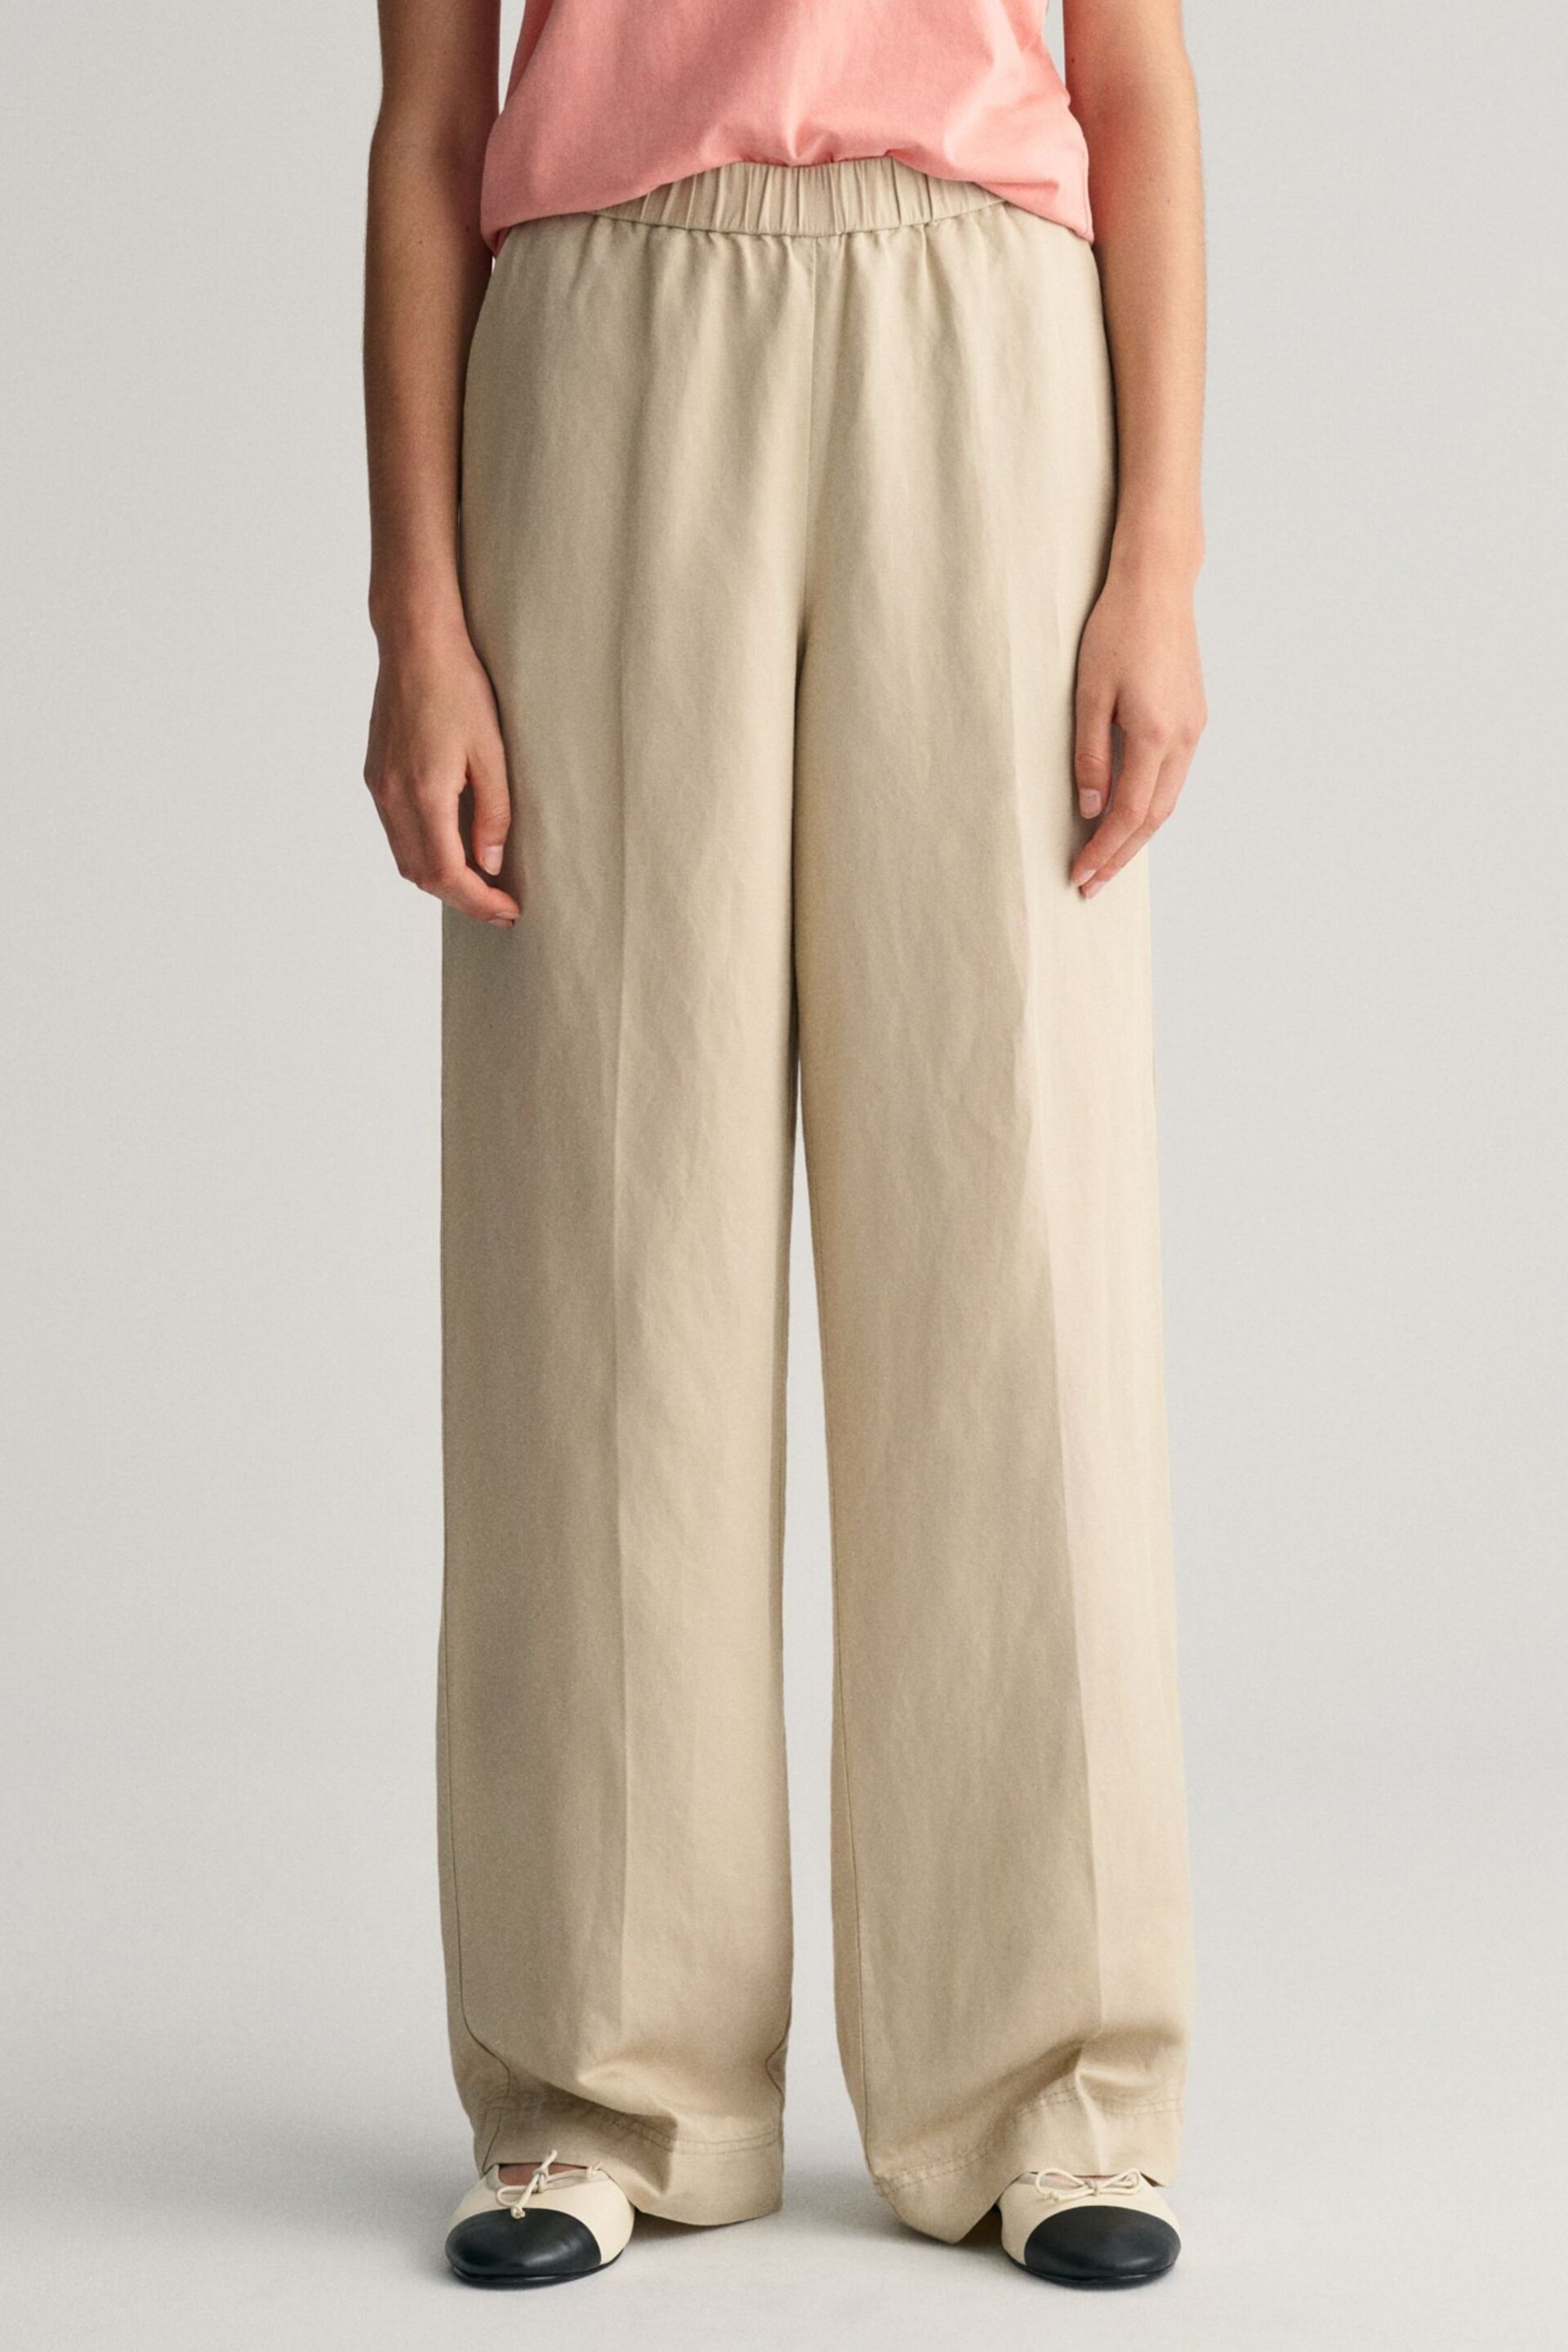 GANT Cream Relaxed Fit Linen Blend Pull-On Trousers - Image 6 of 8